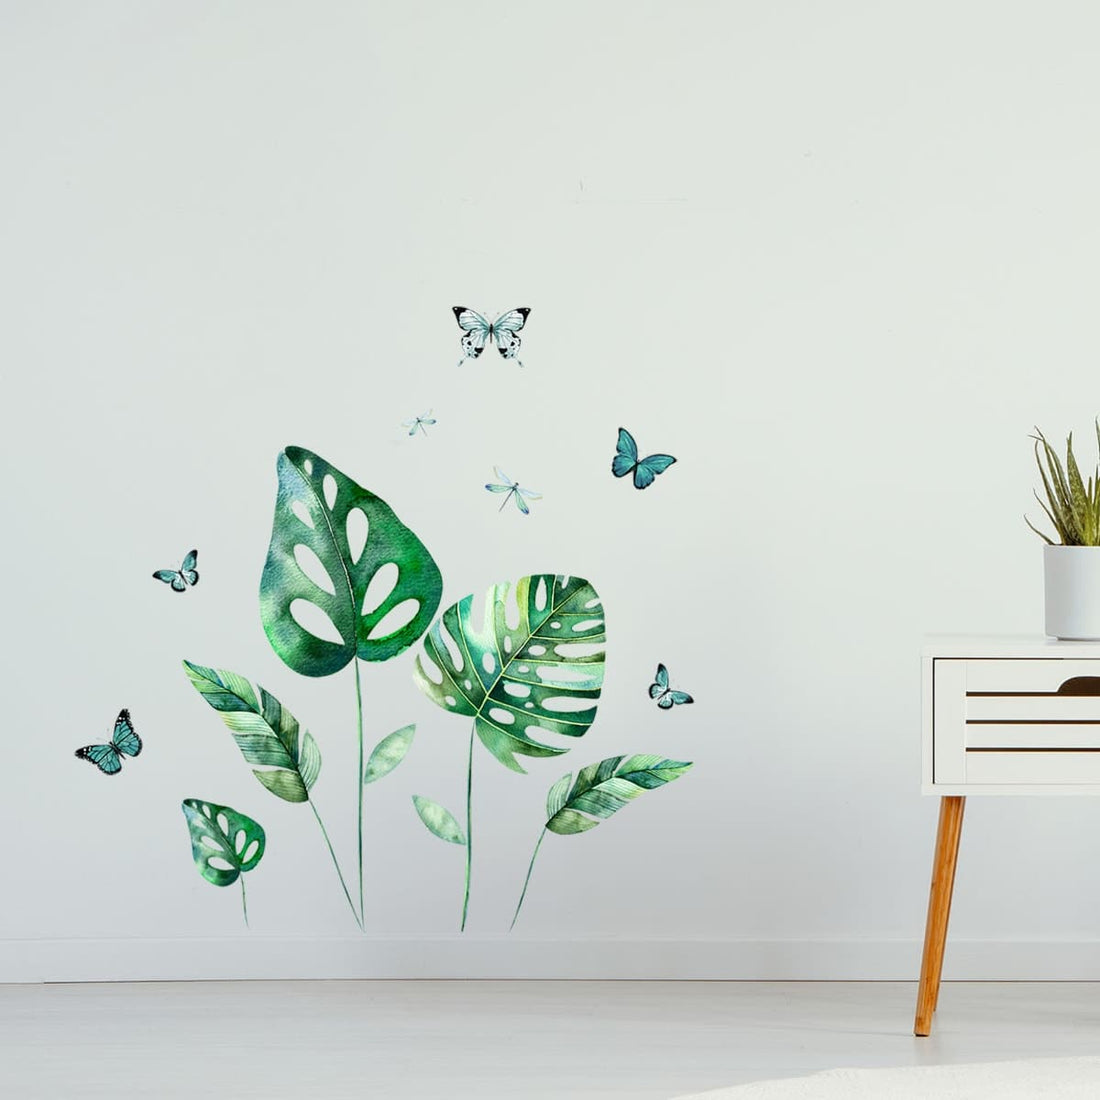 WALL STICKER TROPICAL LEAVES L 47.5X67 - best price from Maltashopper.com BR480010351